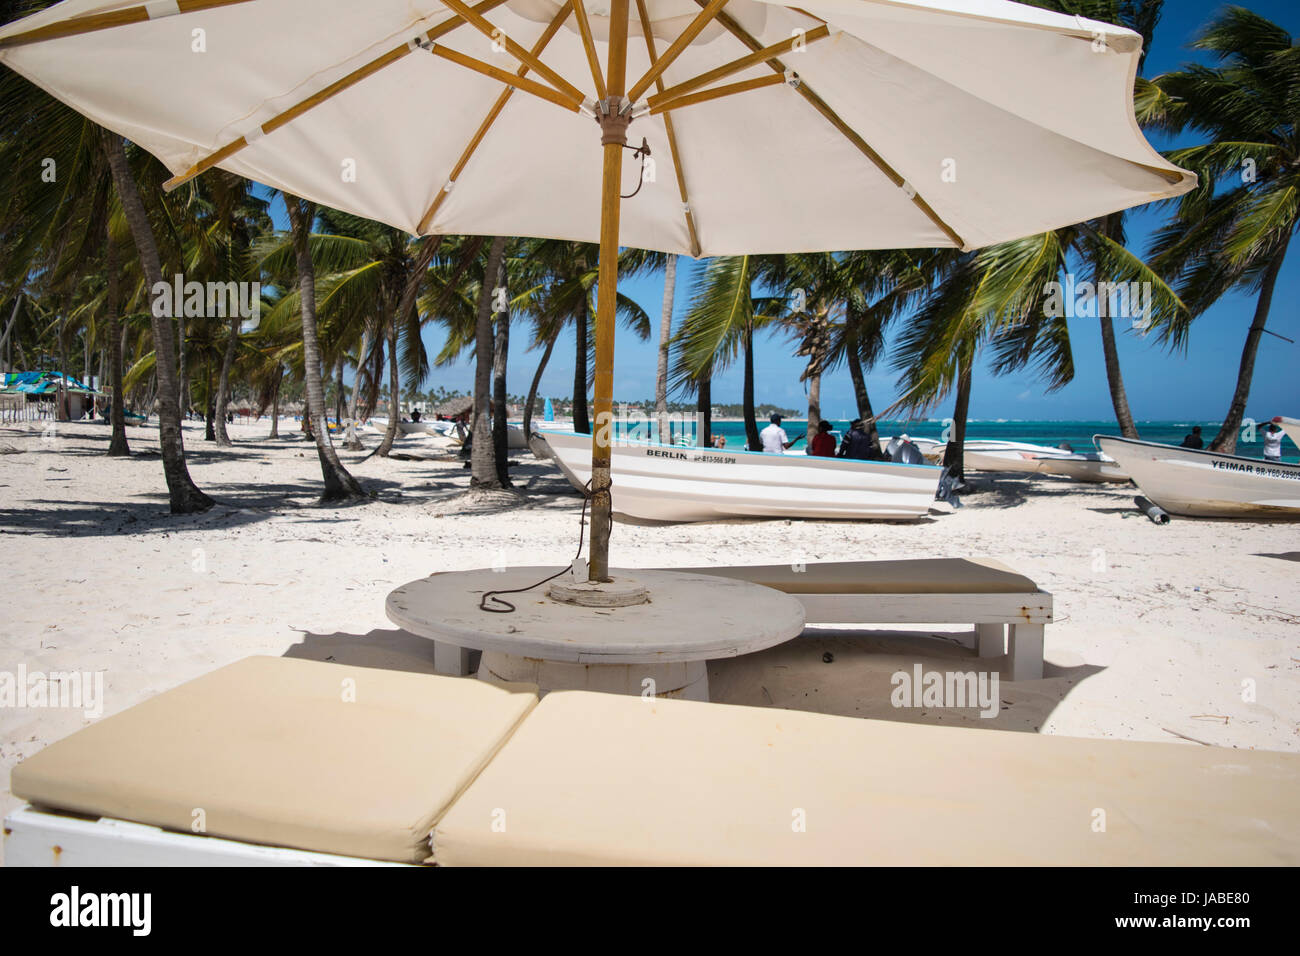 The Sandy Beach of Punta Cana Resort. A Holiday in the Dominican Republic during March. Stock Photo